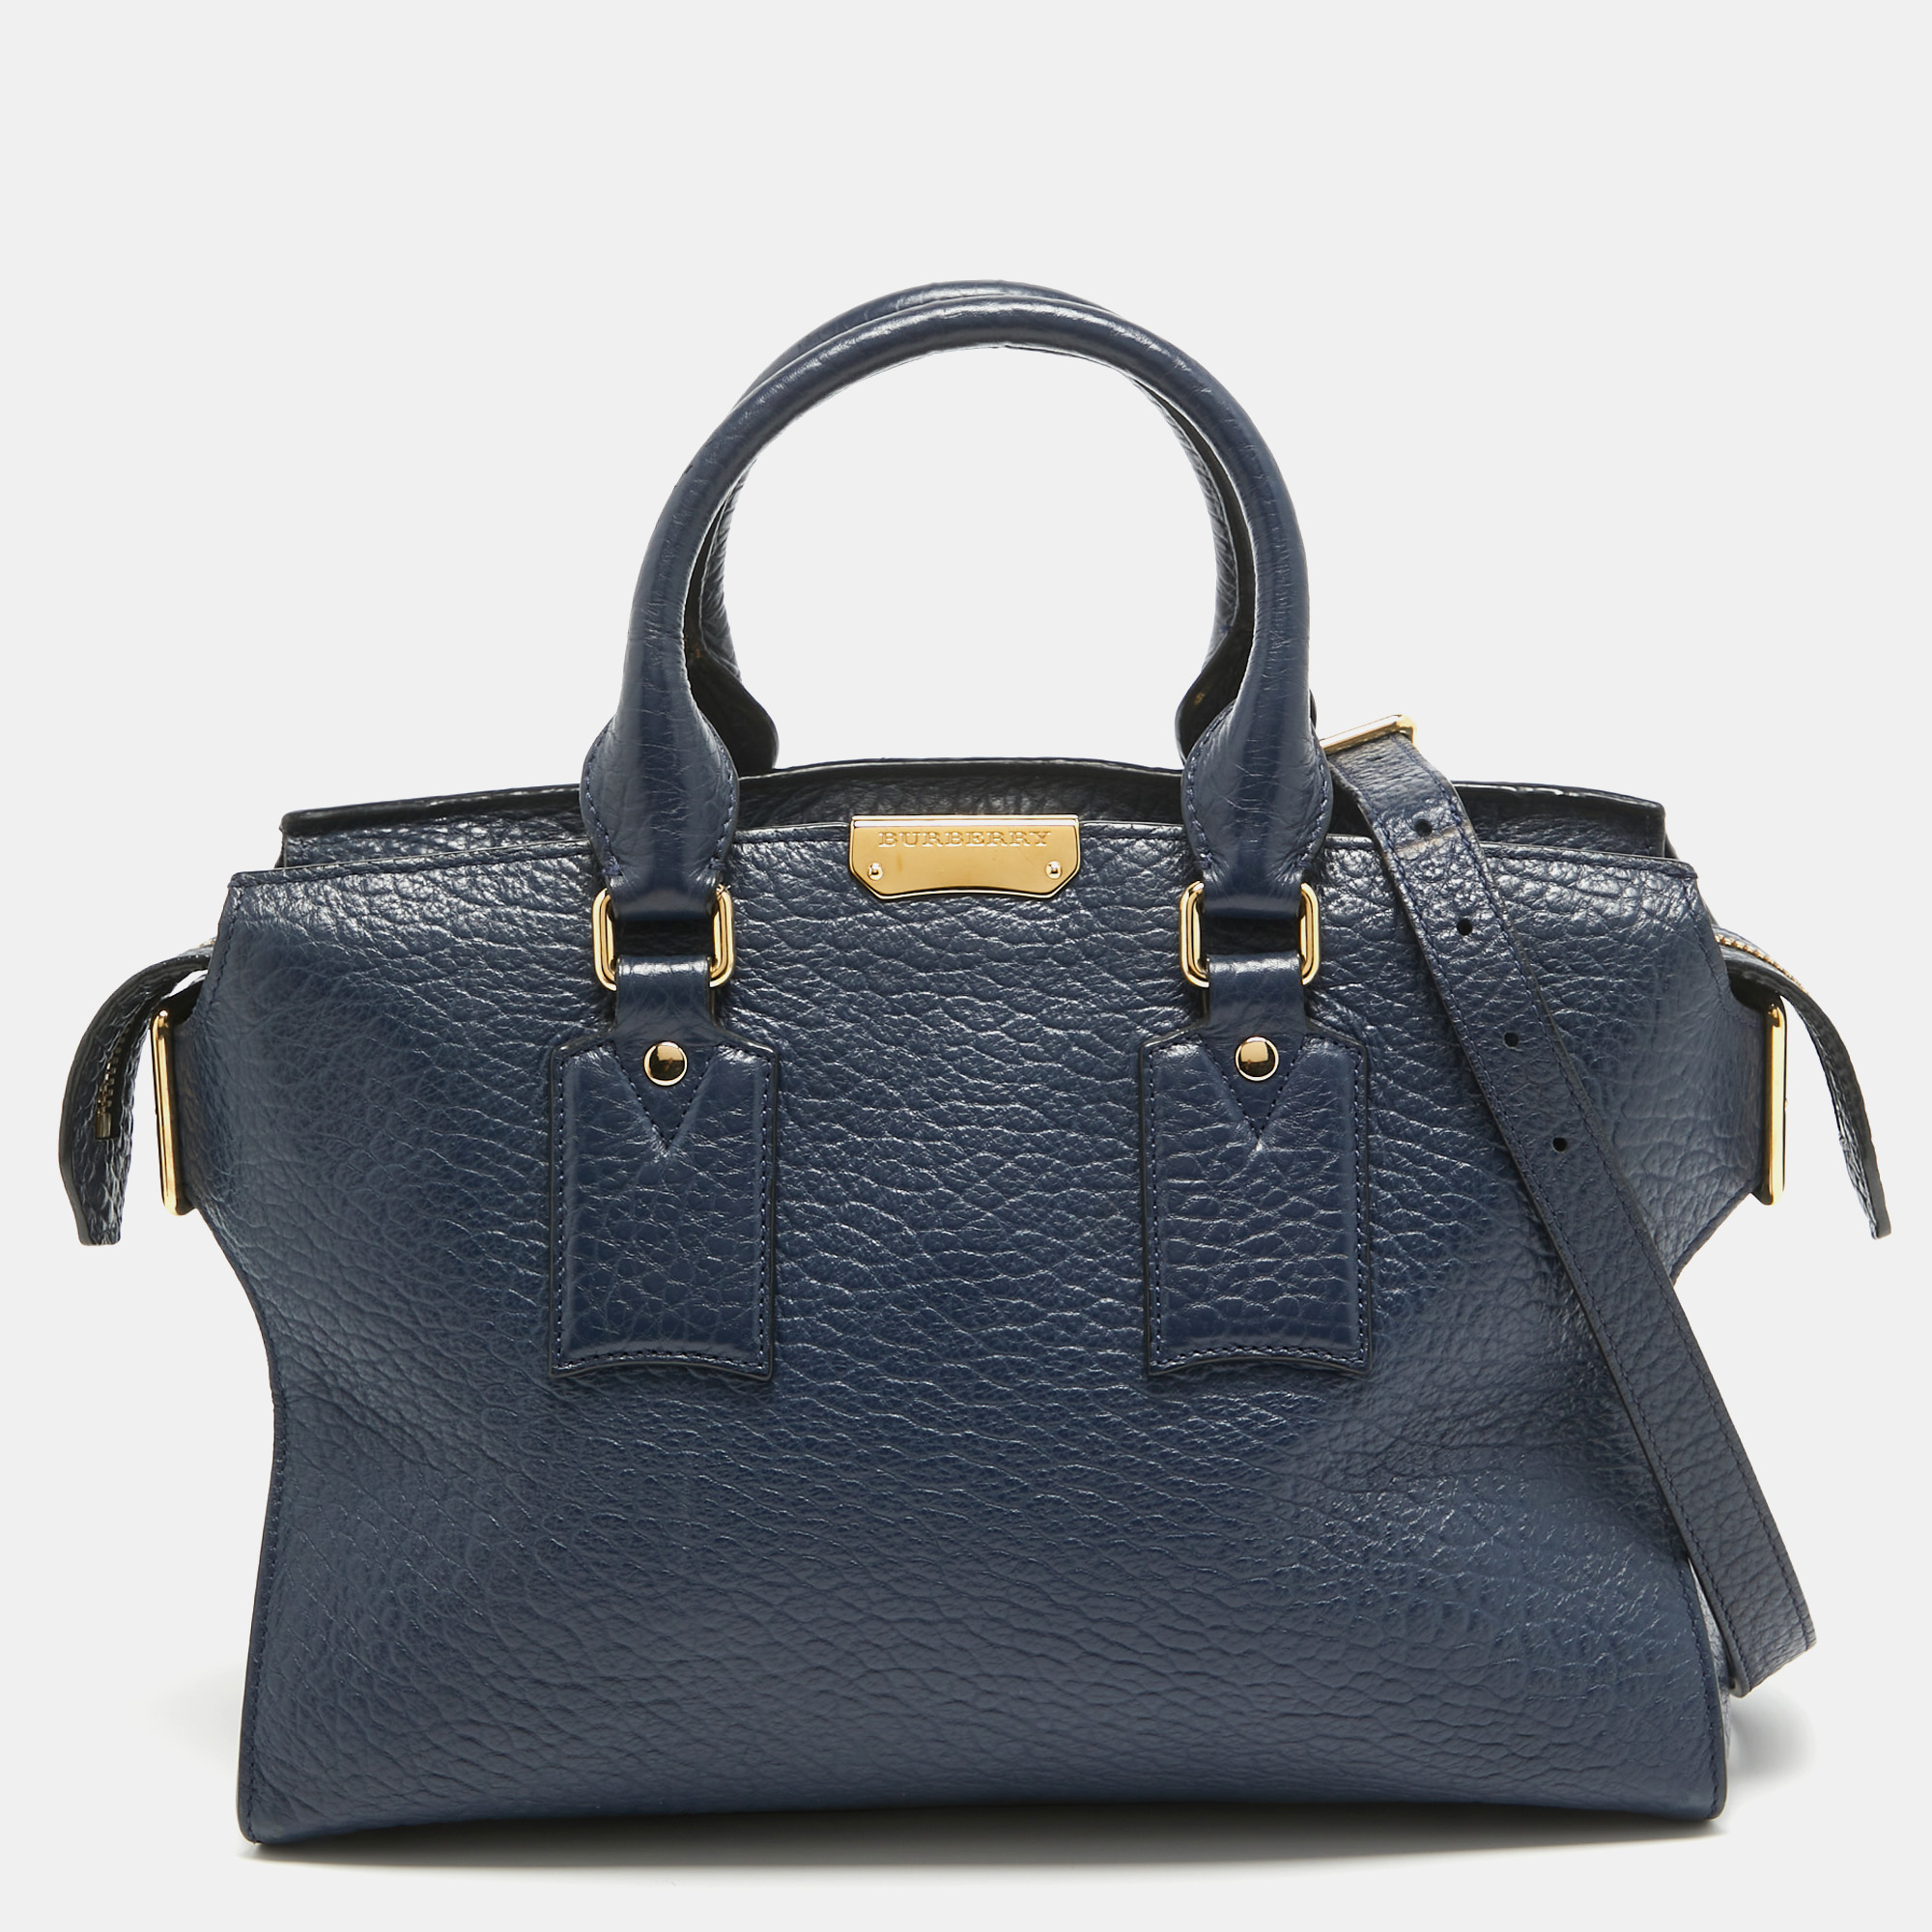 Burberry blue pebbled leather clifton satchel